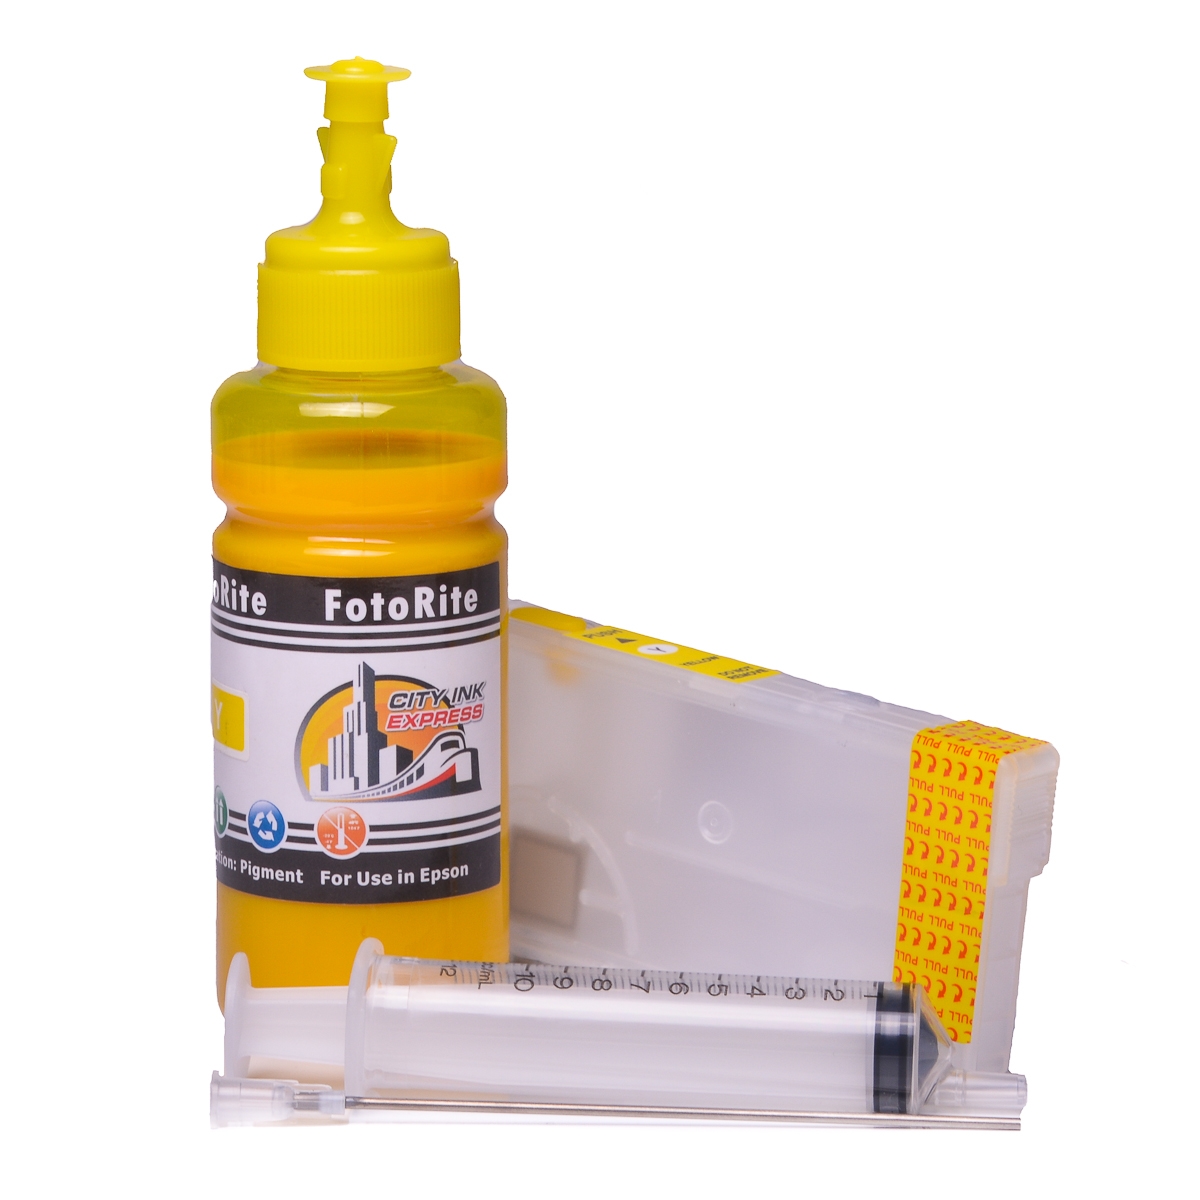 Refillable pigment Cheap printer cartridges for Epson WF-4745DTWF KeyBoard 407 - C13T07U440 Yellow